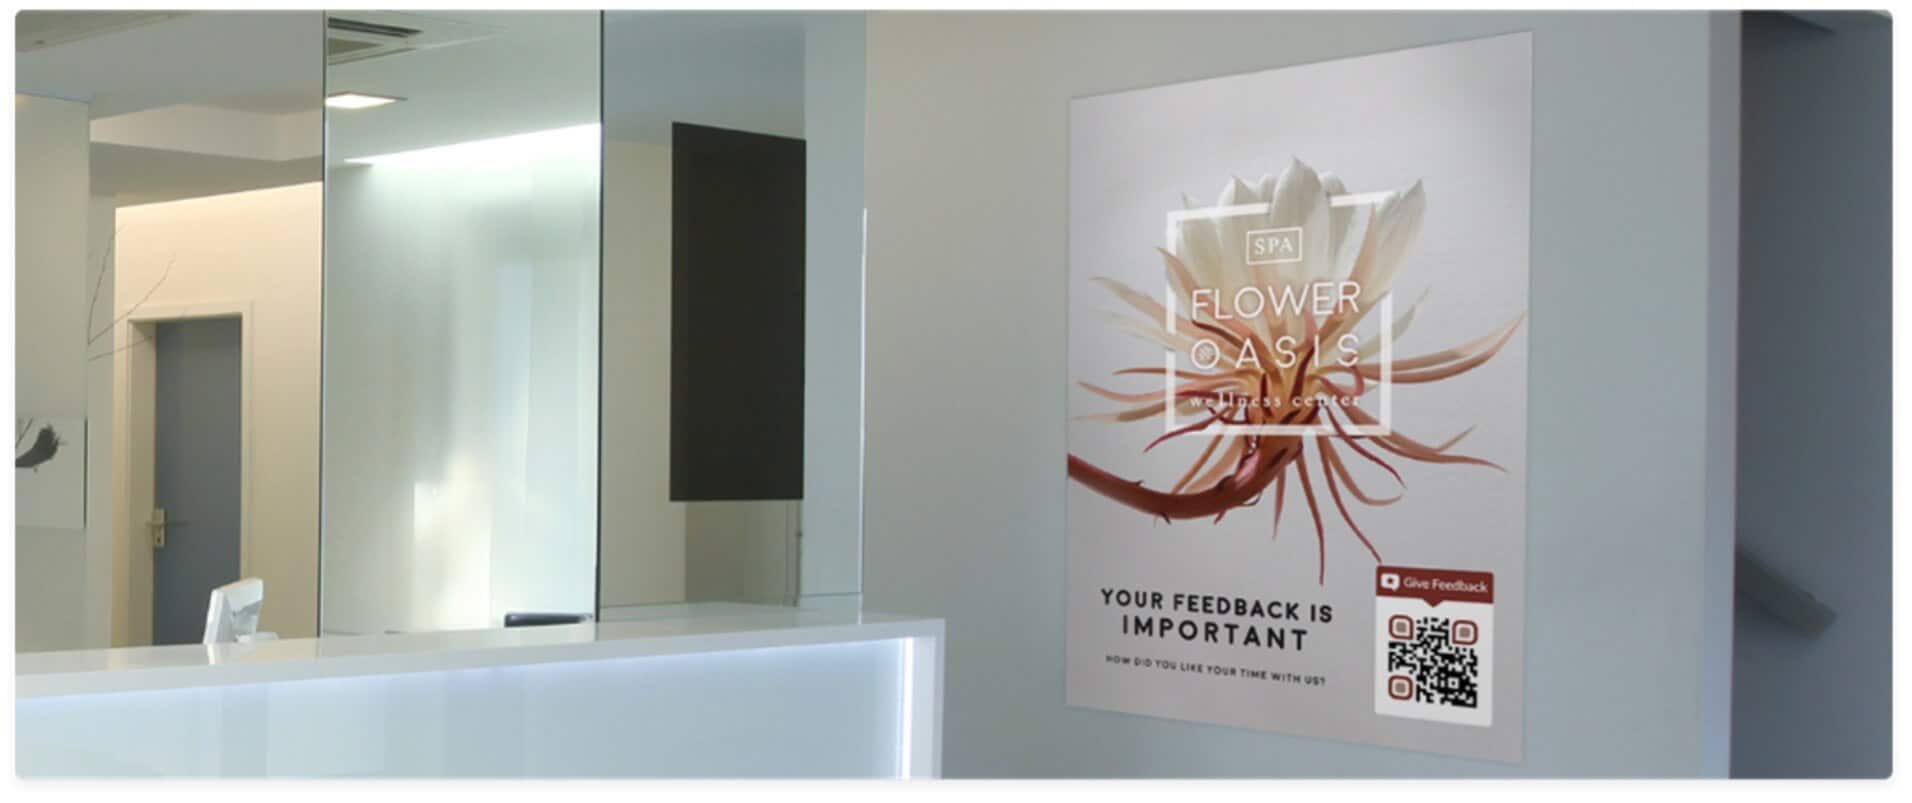 A hotel reception area featuring a poster requesting guest feedback.